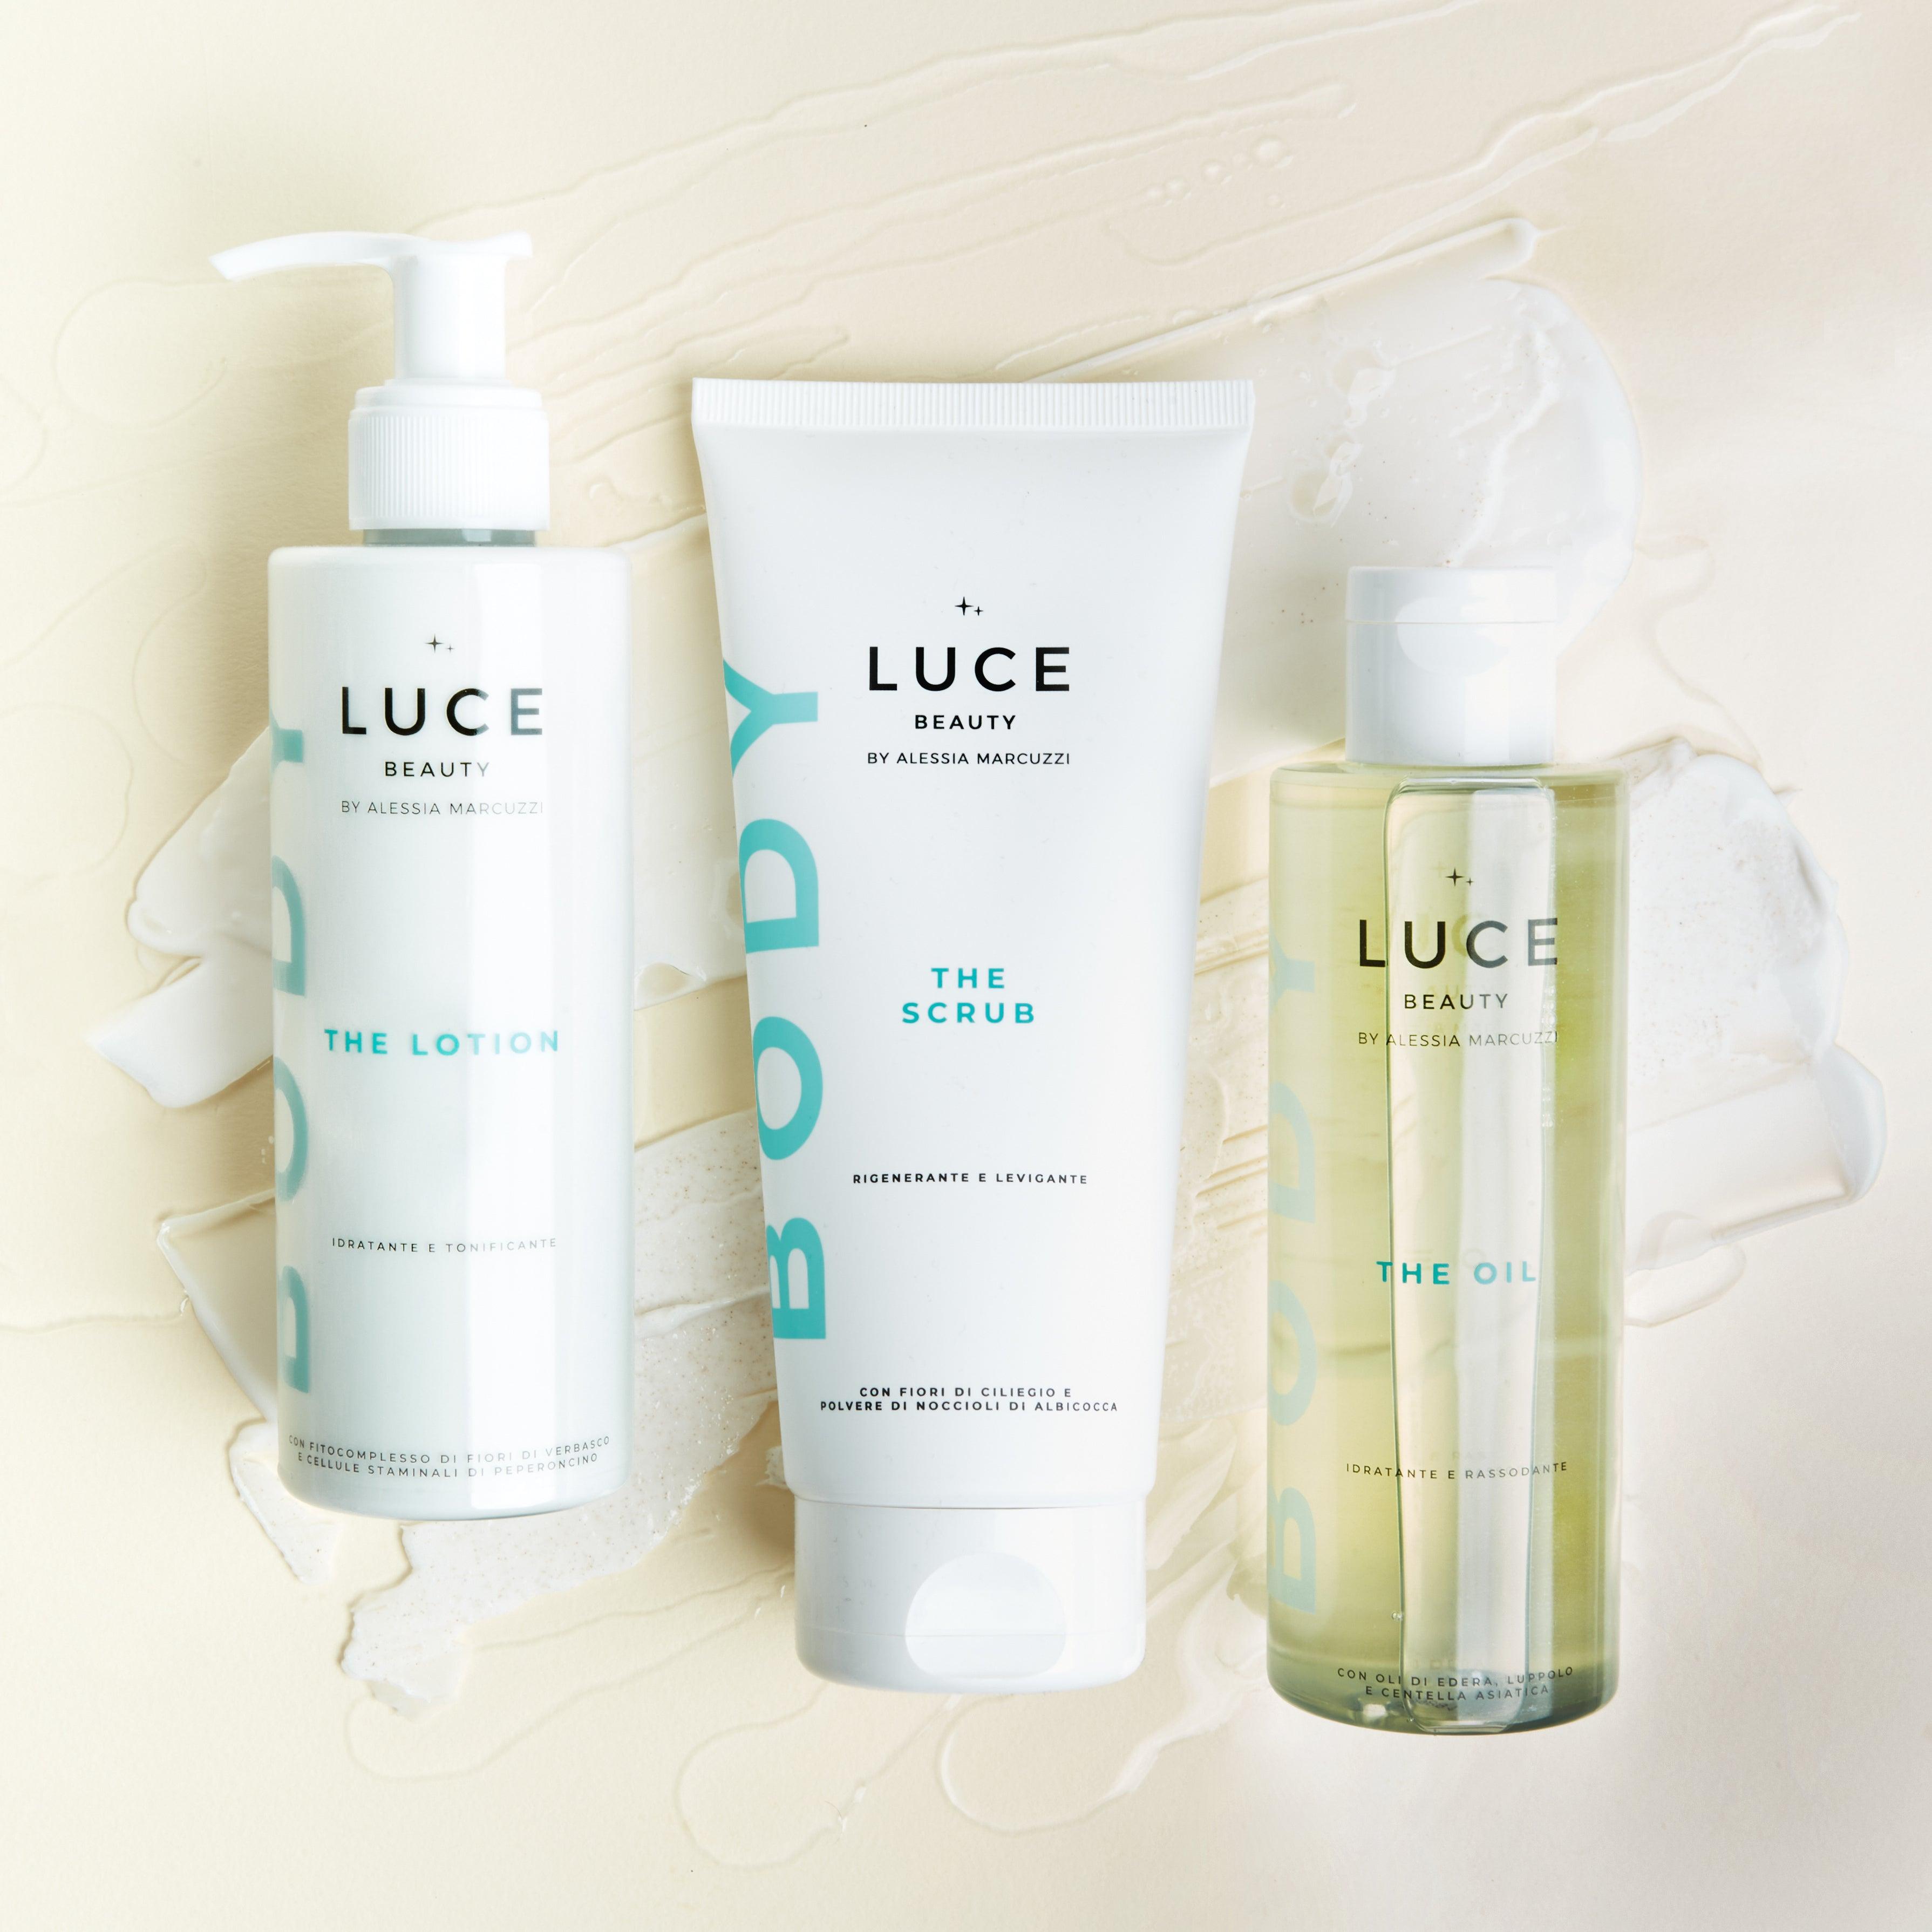 The Body Routine - The lotion, the oil, the scrub - texture - Luce Beauty by Alessia Marcuzzi